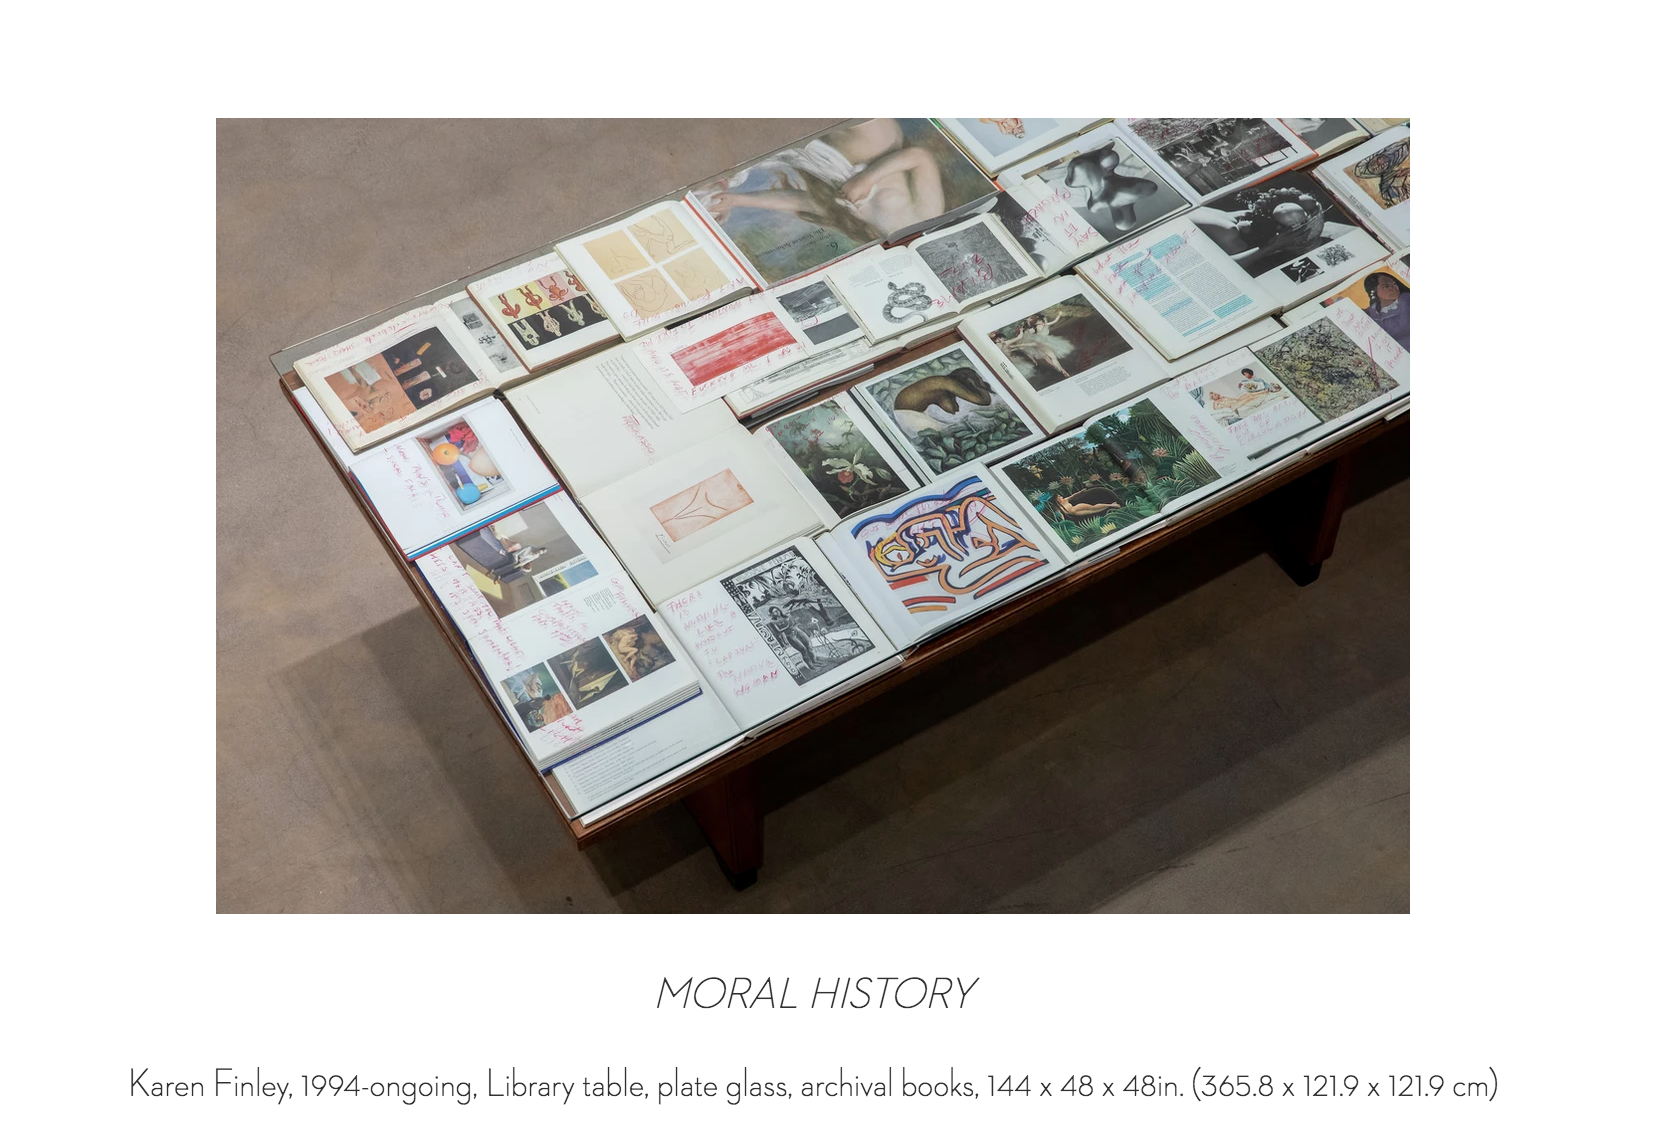 Library table, plate glass, archival books